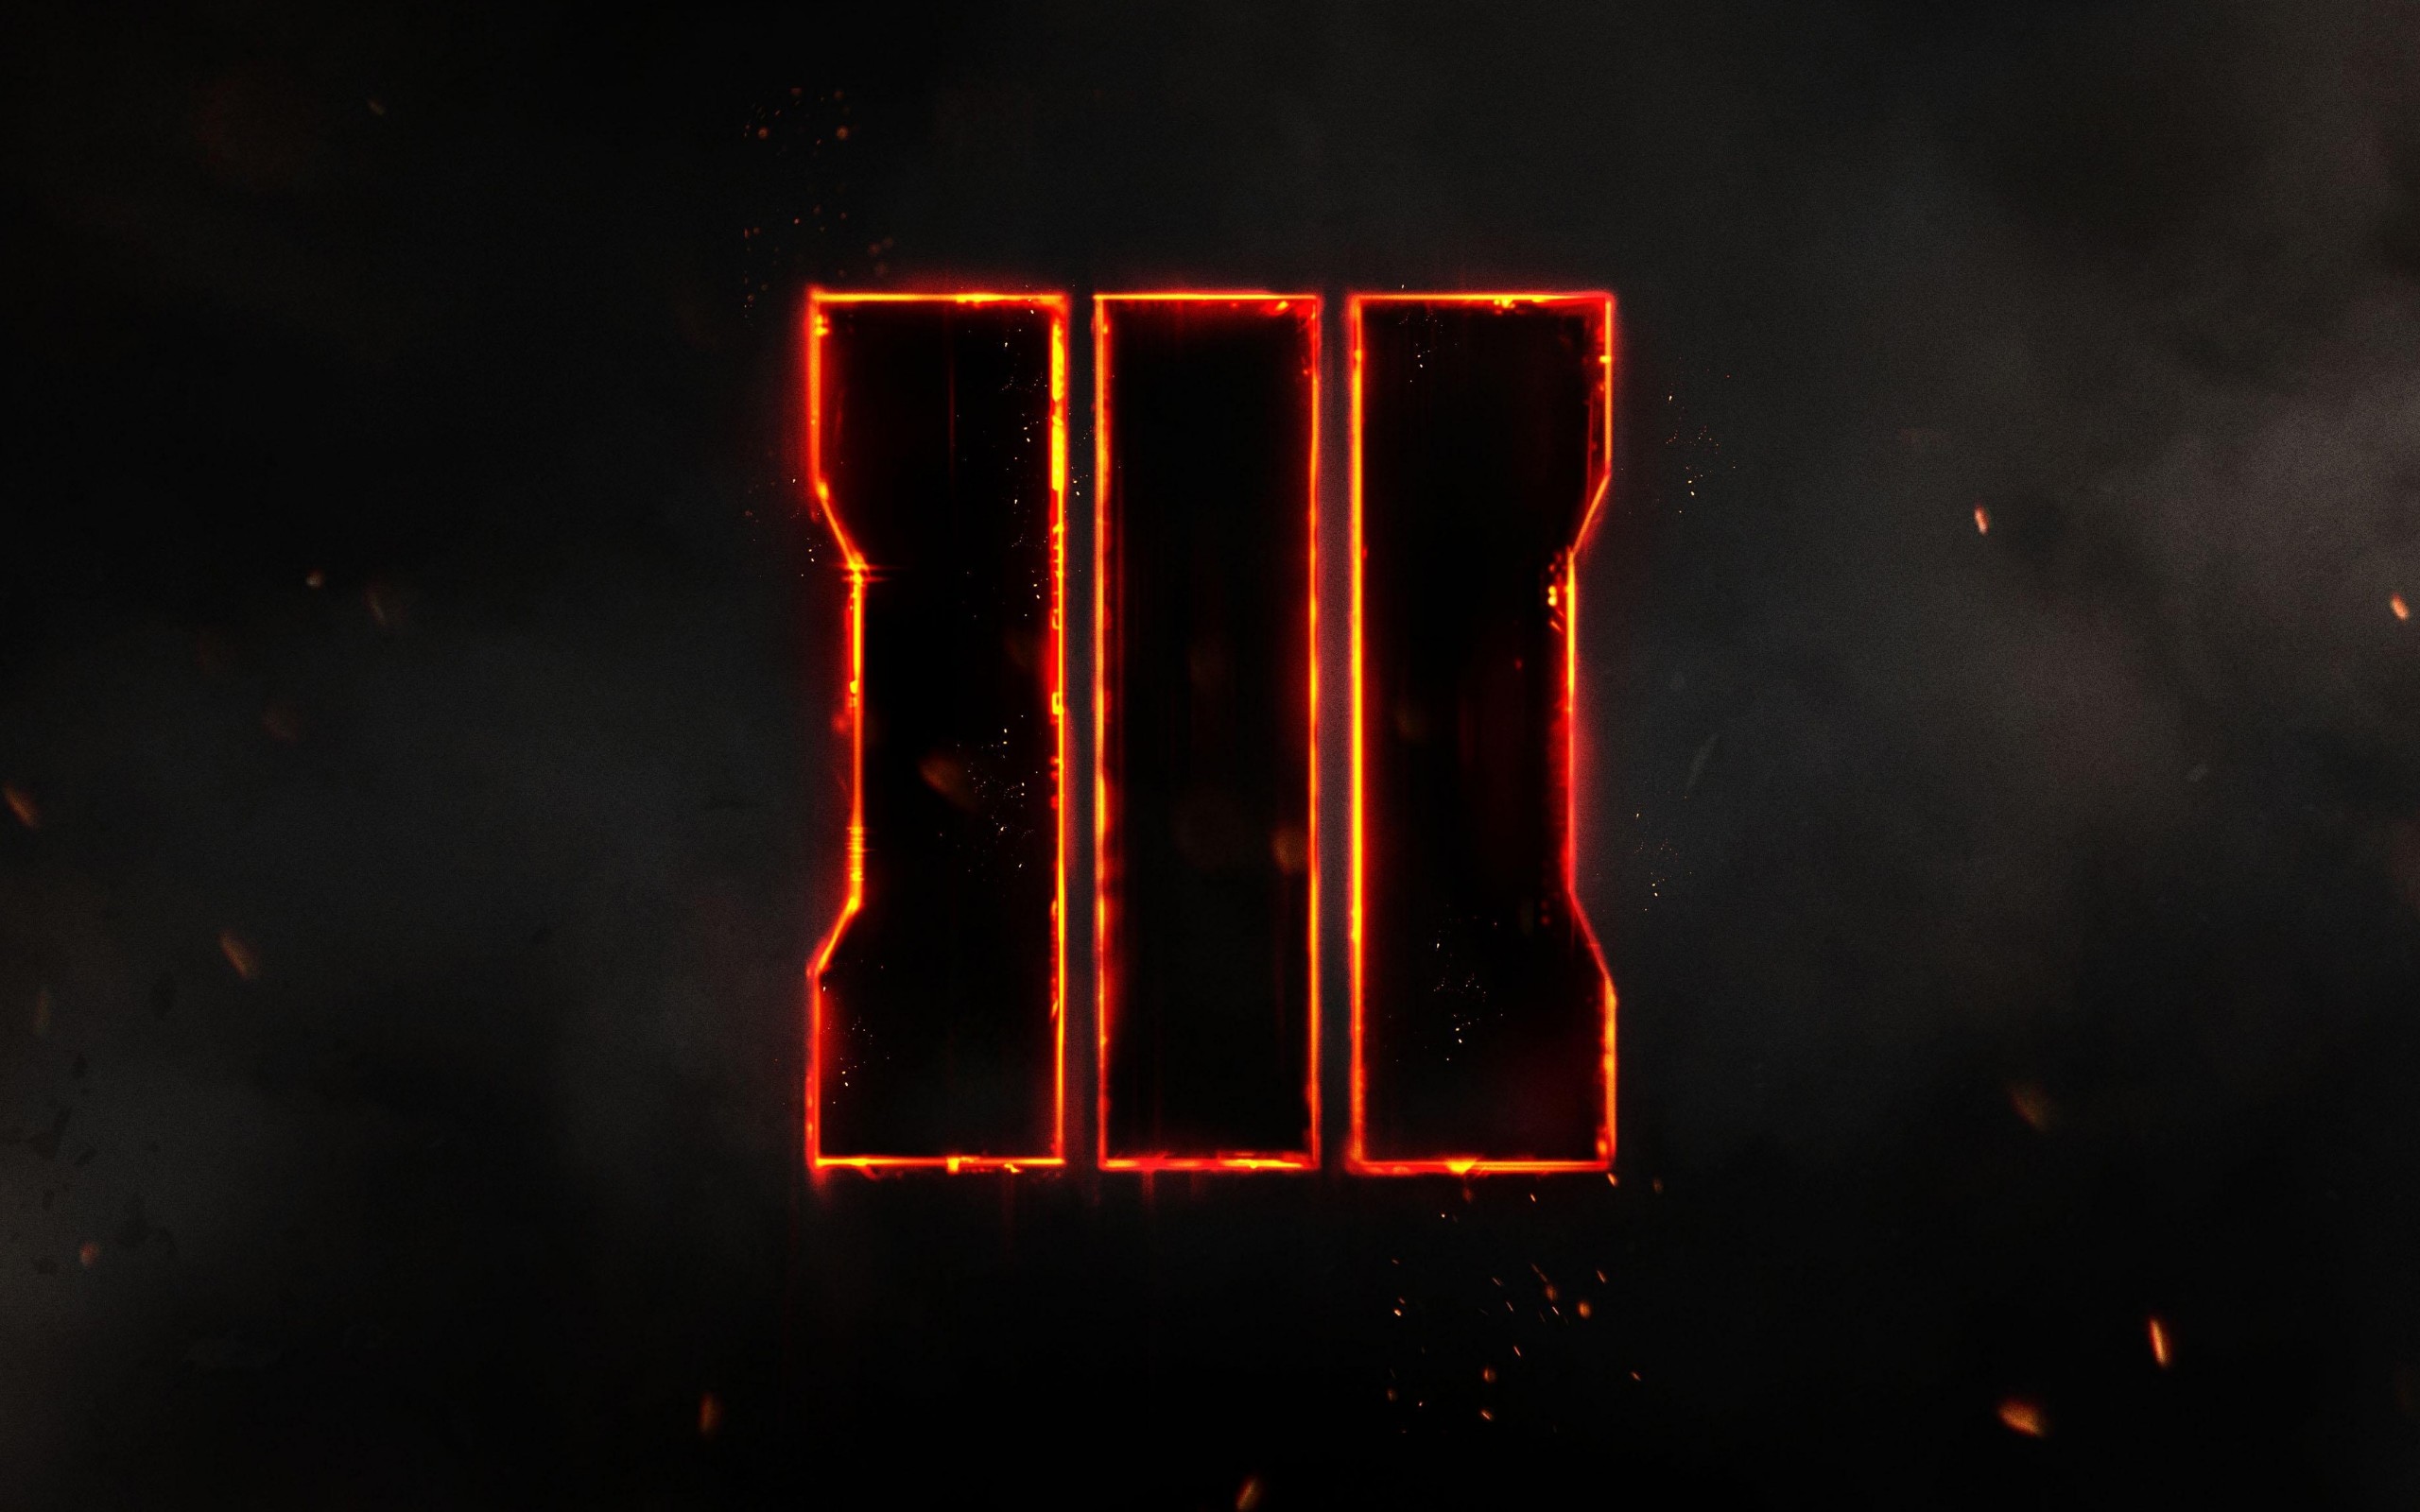 2560x1600 70 Call Of Duty: Black Ops Iii Hd Wallpapers | Backgrounds